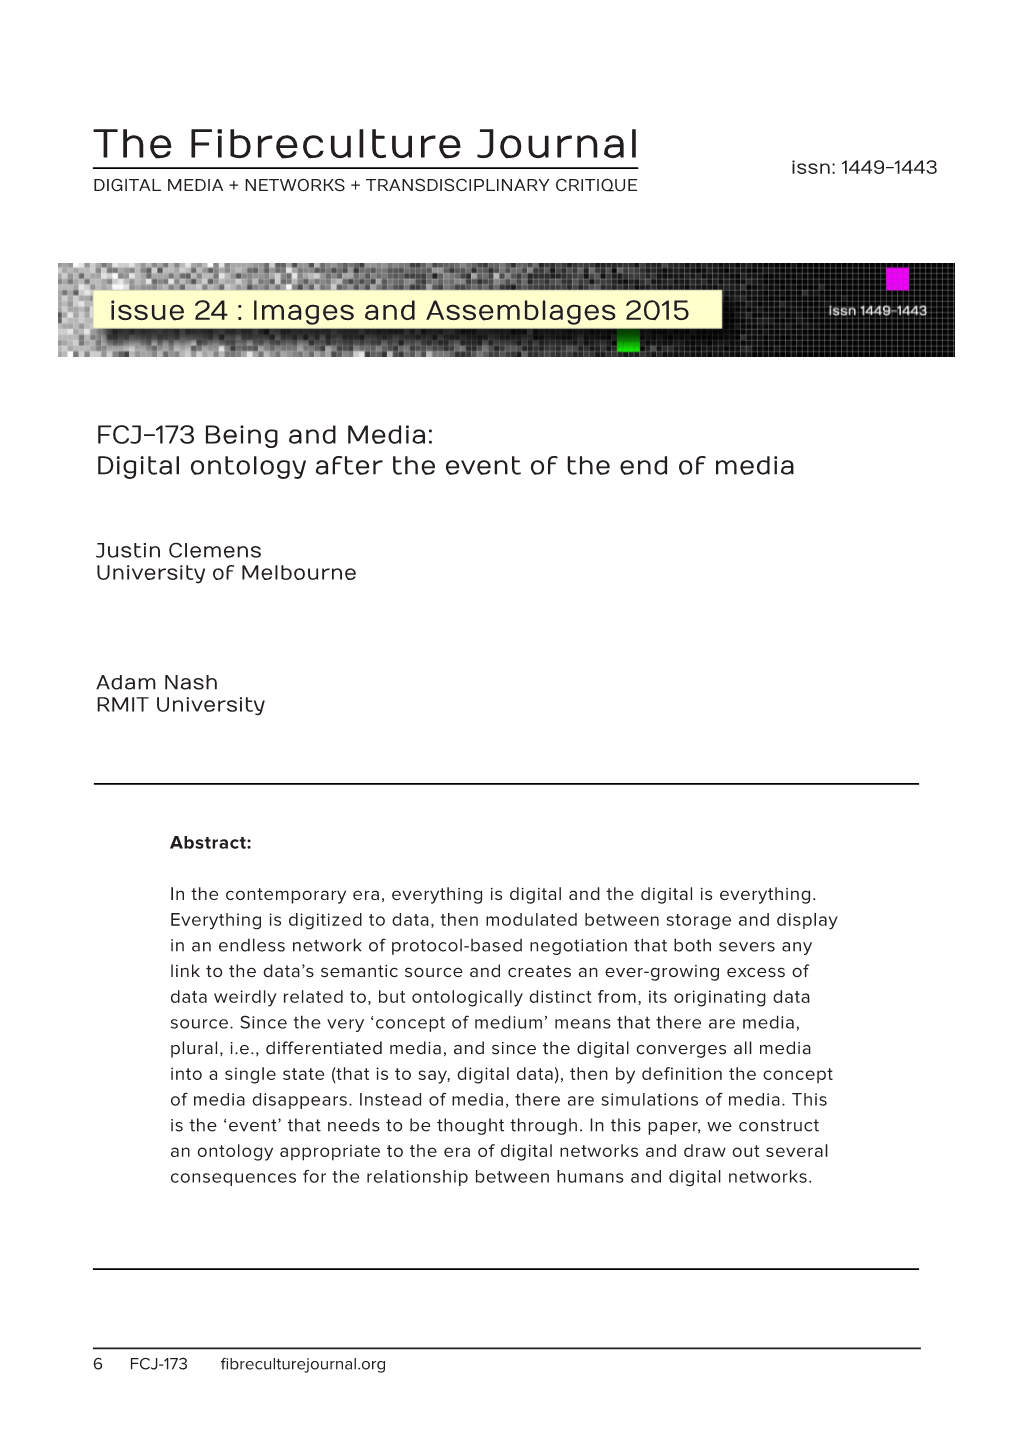 FCJ-173 Being and Media: Digital Ontology After the Event of the End of Media